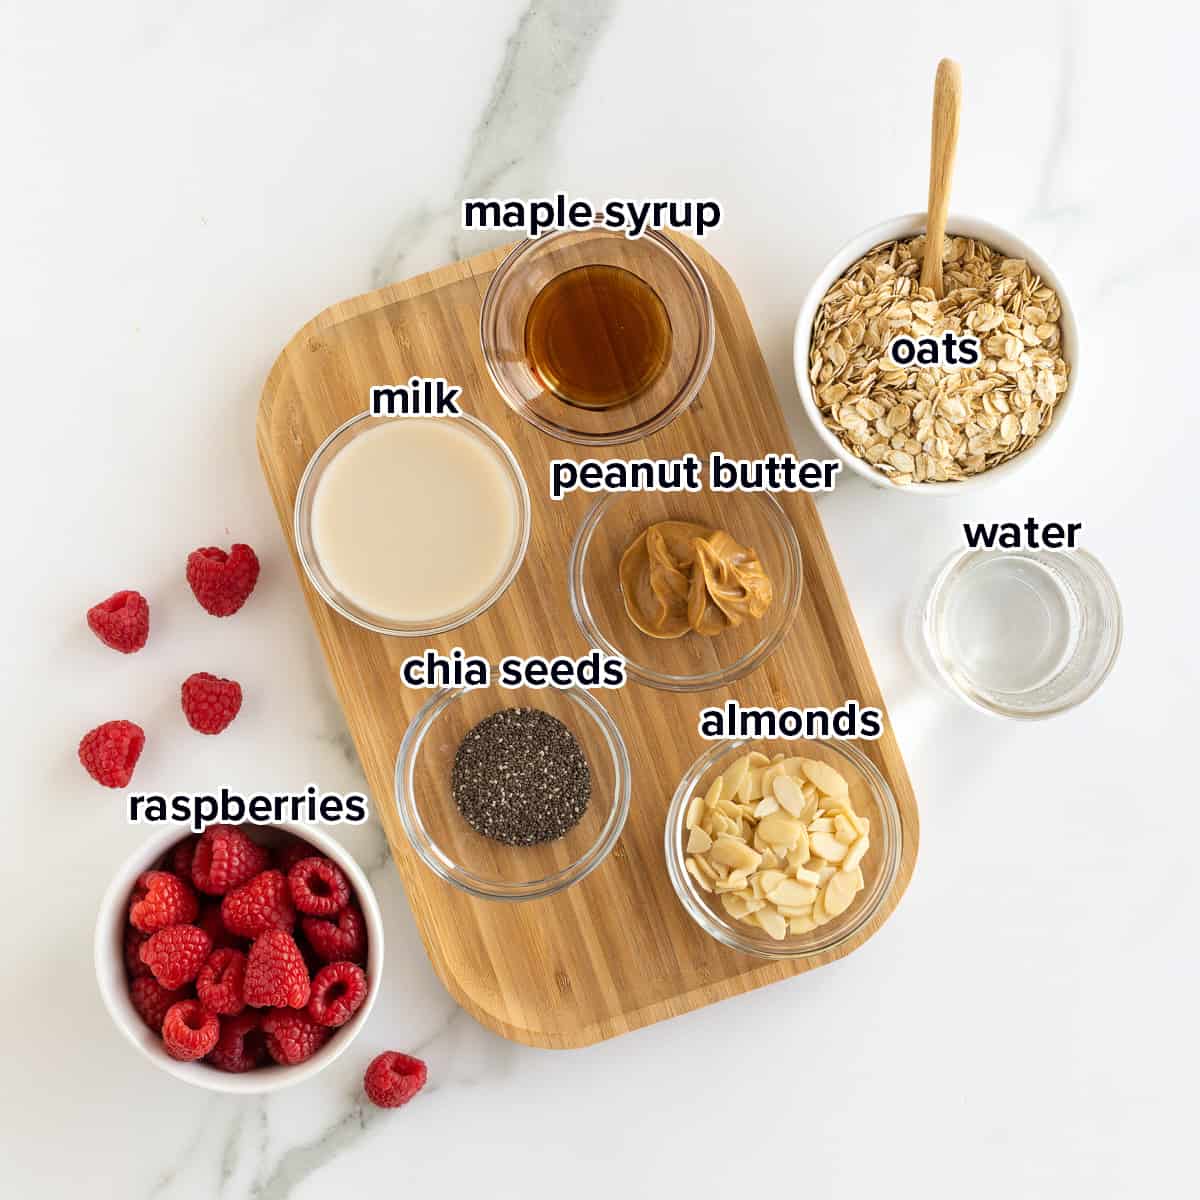 Oats, raspberries, peanut butter and other ingredients in bowls with text.